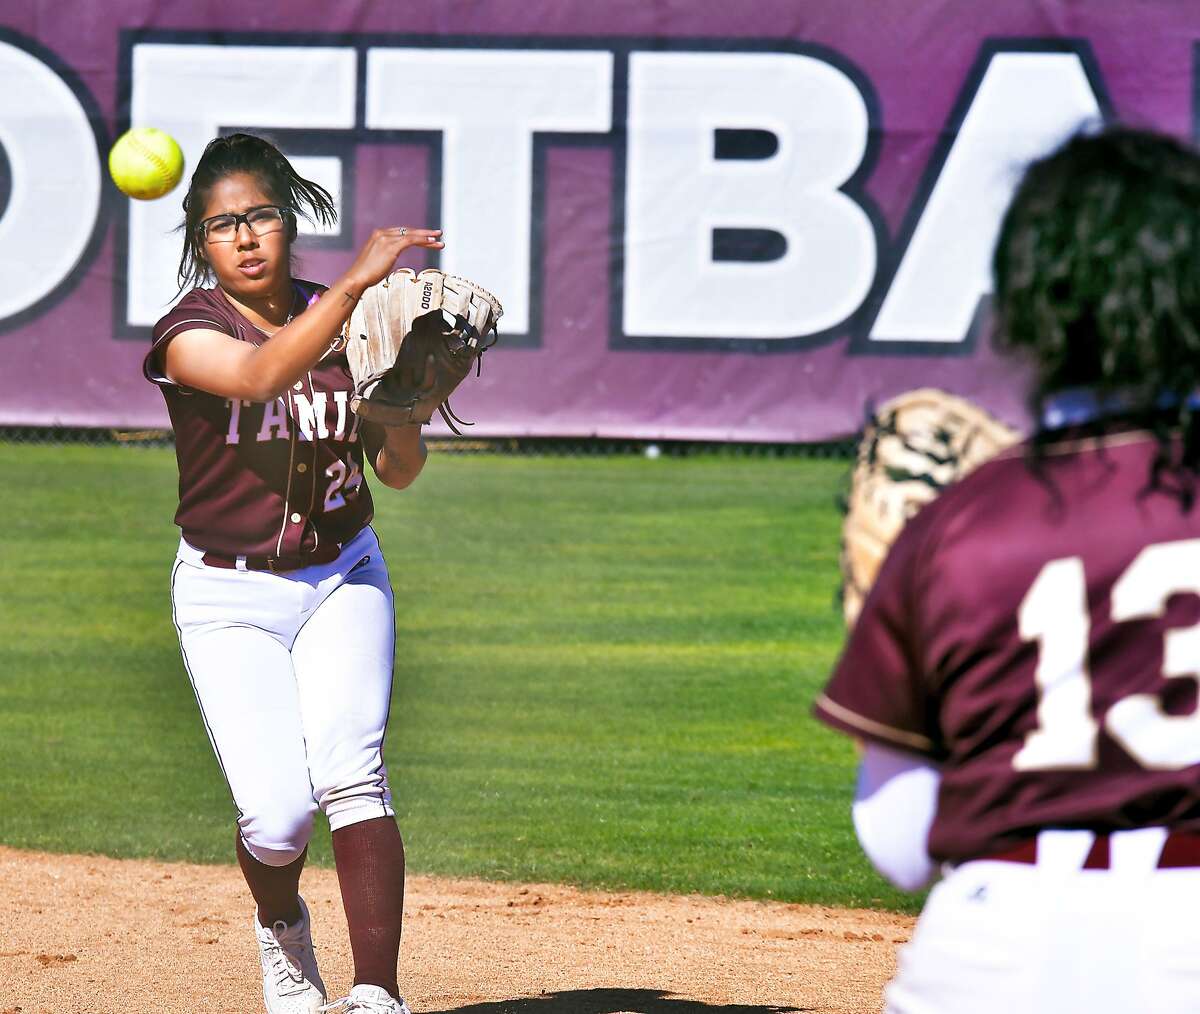 Melanie had one of TAMIU’s two hits Saturday as the Dustdevils were shut out 11-0 in five innings in their series finale at Oklahoma Christian.